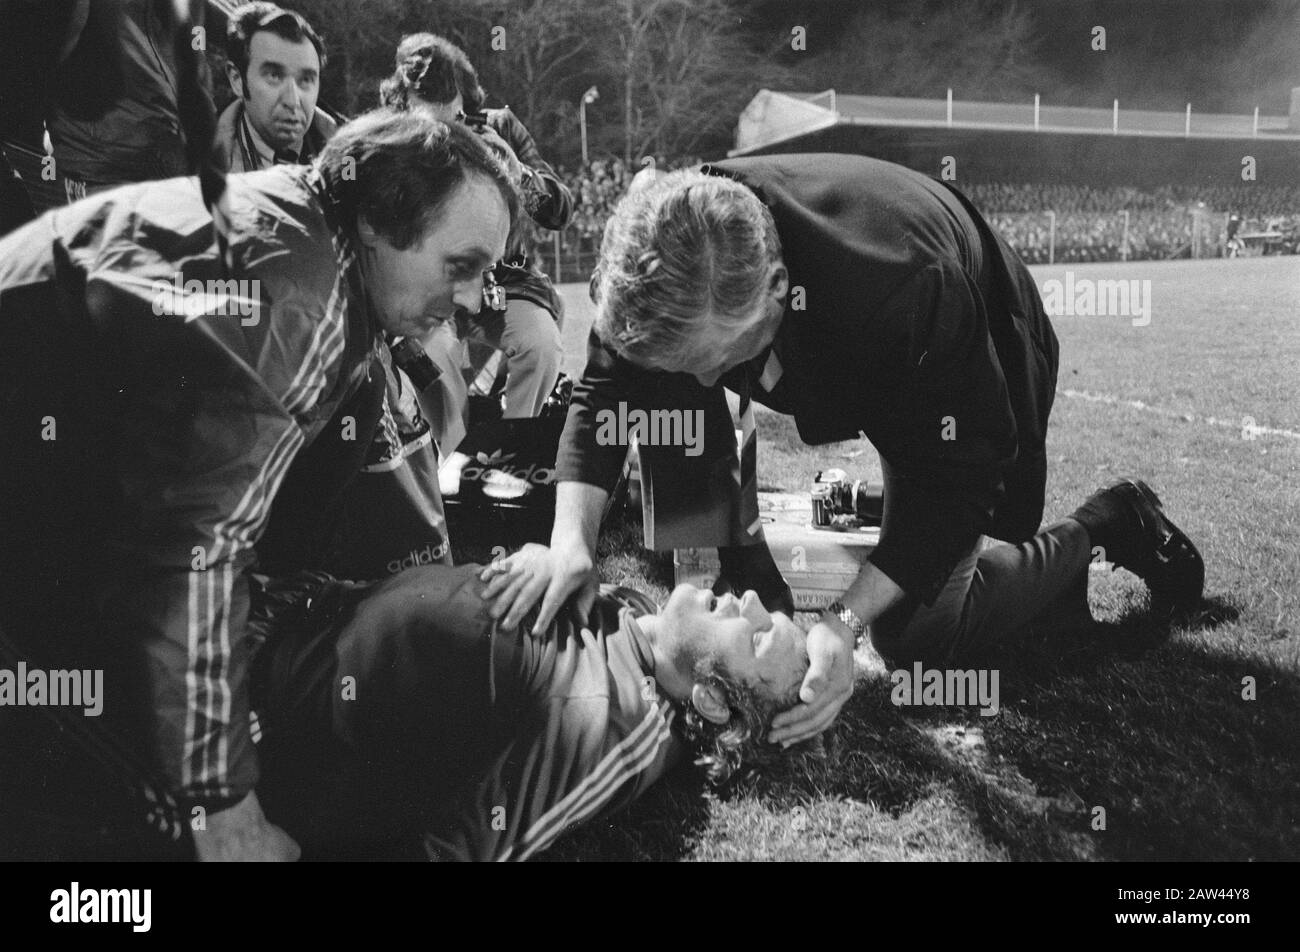 PSV 0-0 against Benfica (Europa Cup II), Willy van de Kerkhof out of bounds after colliding with goalkeeper Henrico / Date: March 5, 1975 Keywords: sport football Person Name: Graveyard, Willy Institution Name: Benfica Stock Photo